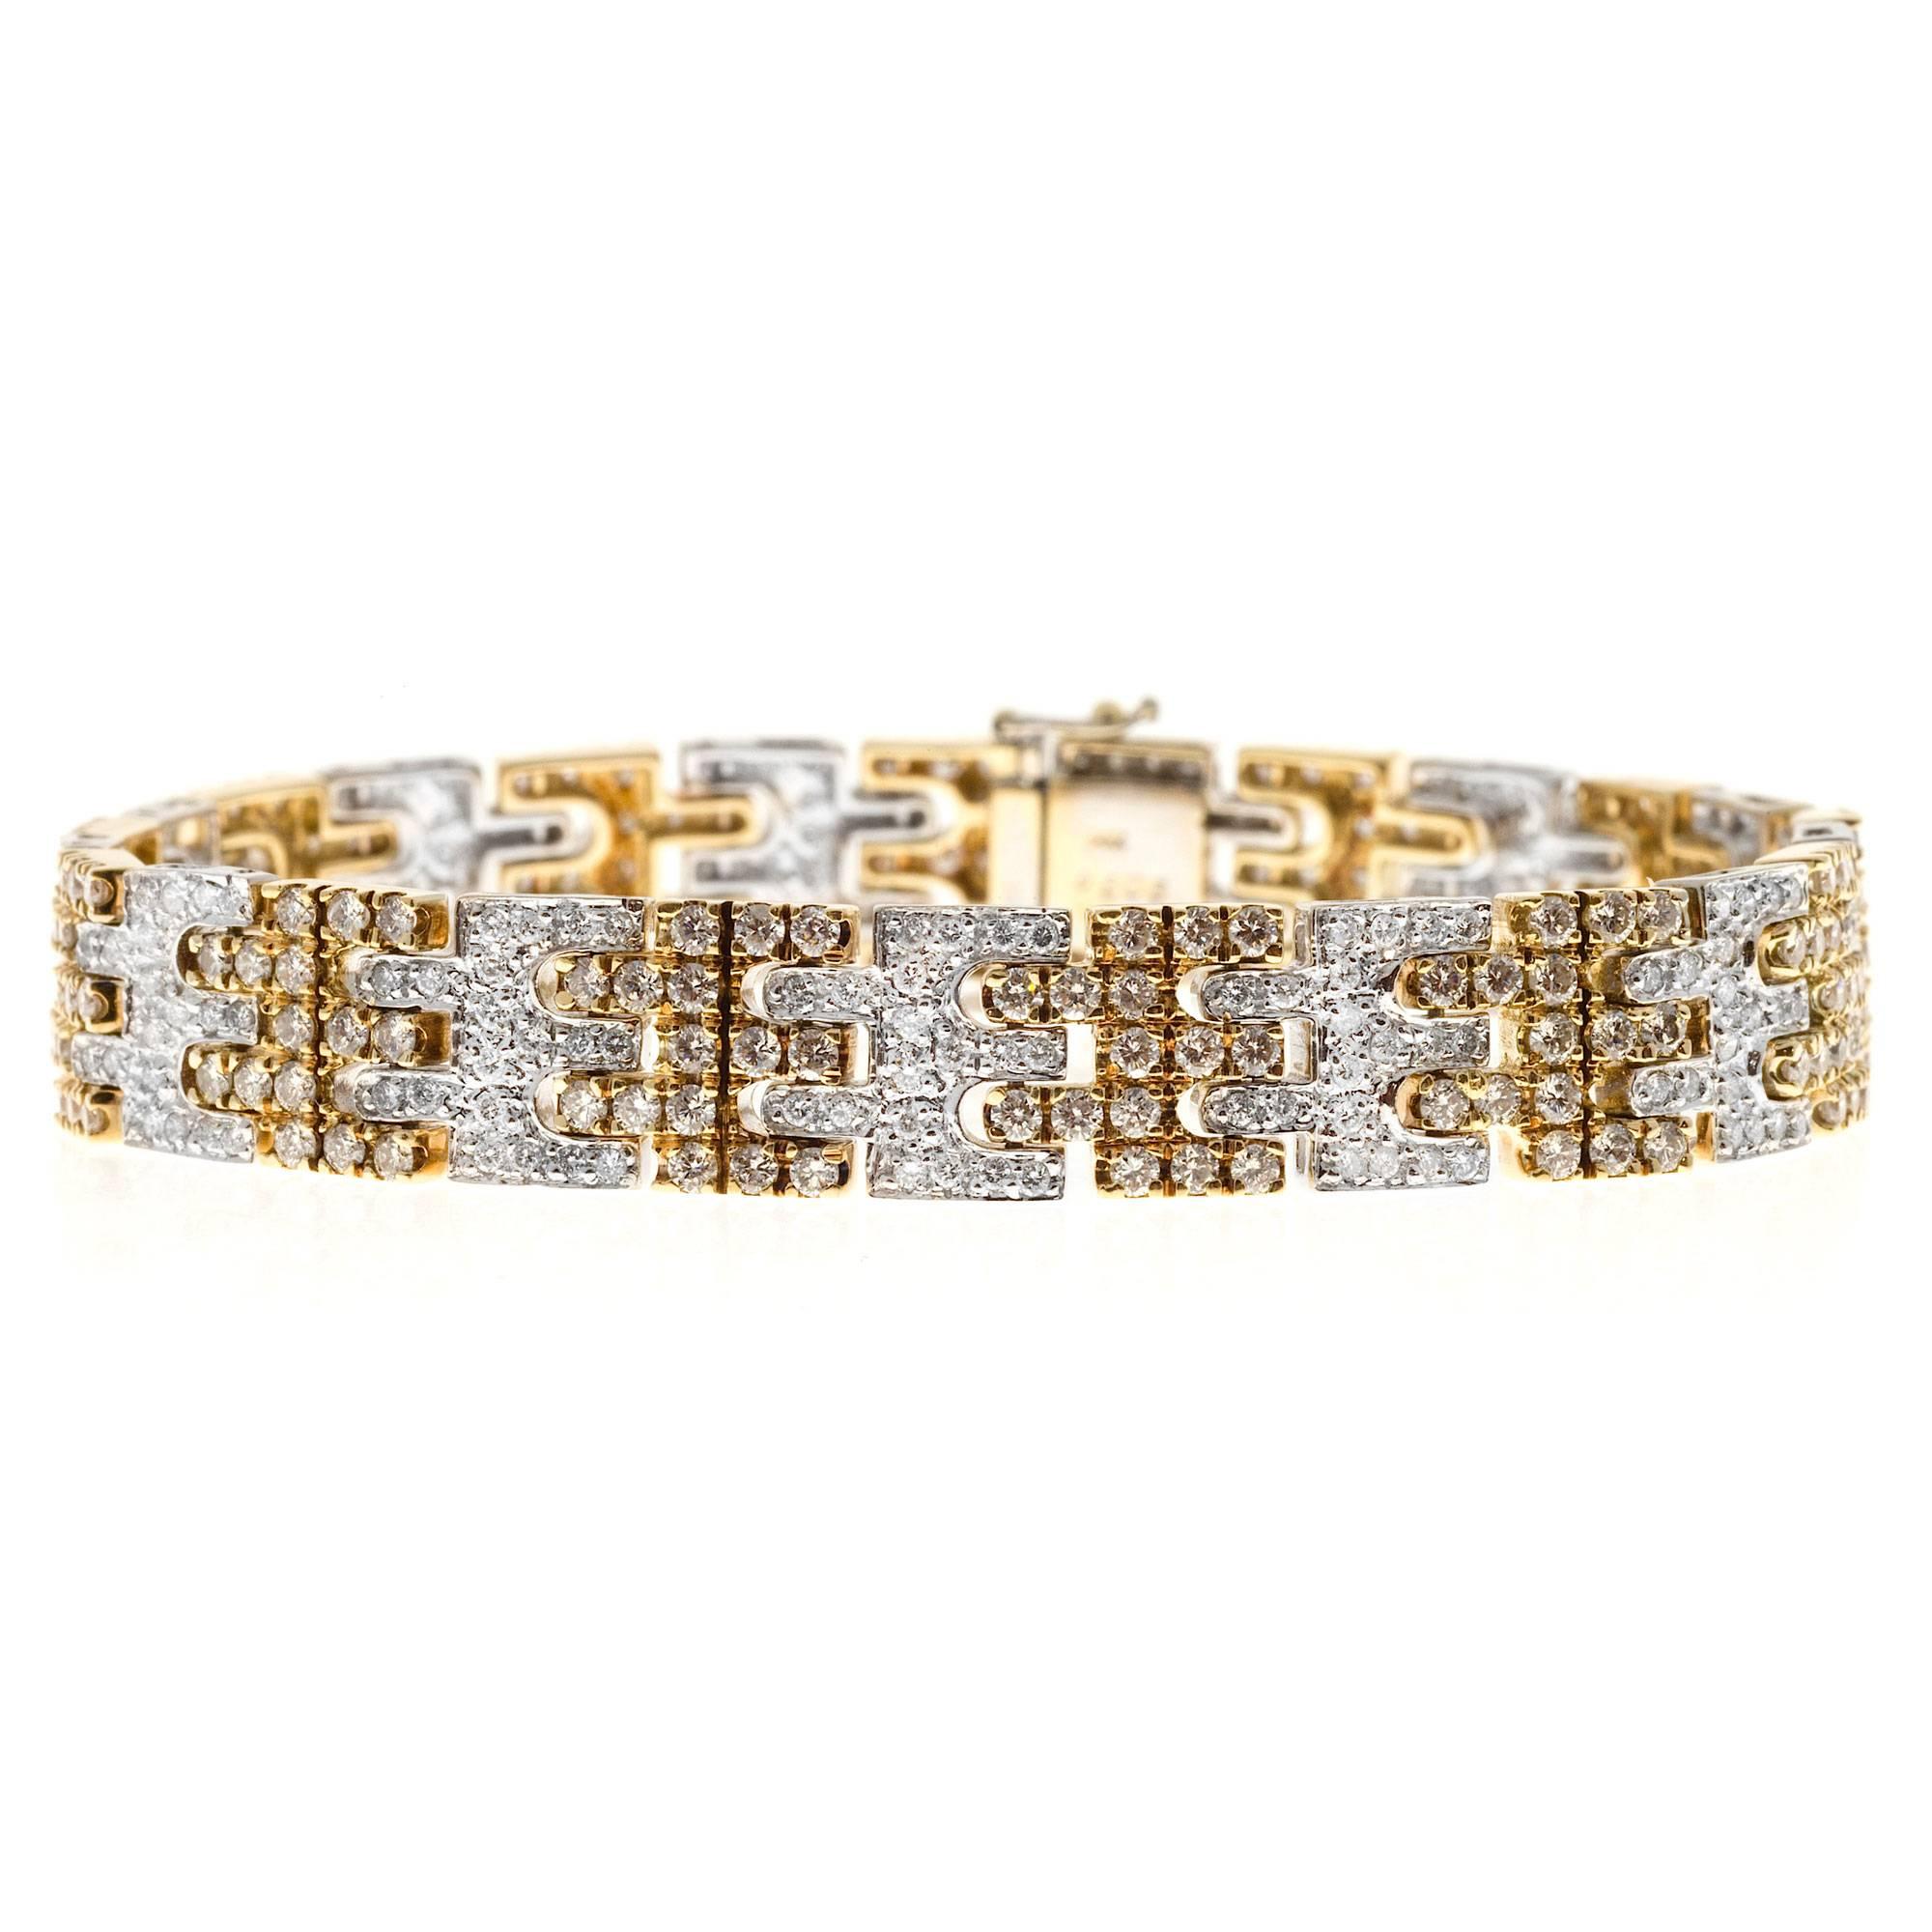 Authentic Sonia B alternating yellow and white gold link bracelet with 394 bright full cut diamonds totaling 6.06cts total. 

394 round full cut brilliant diamonds, approx. total weight 6.06cts, G, VS

29.6 grams
Tested: 14k
Stamped: 14k